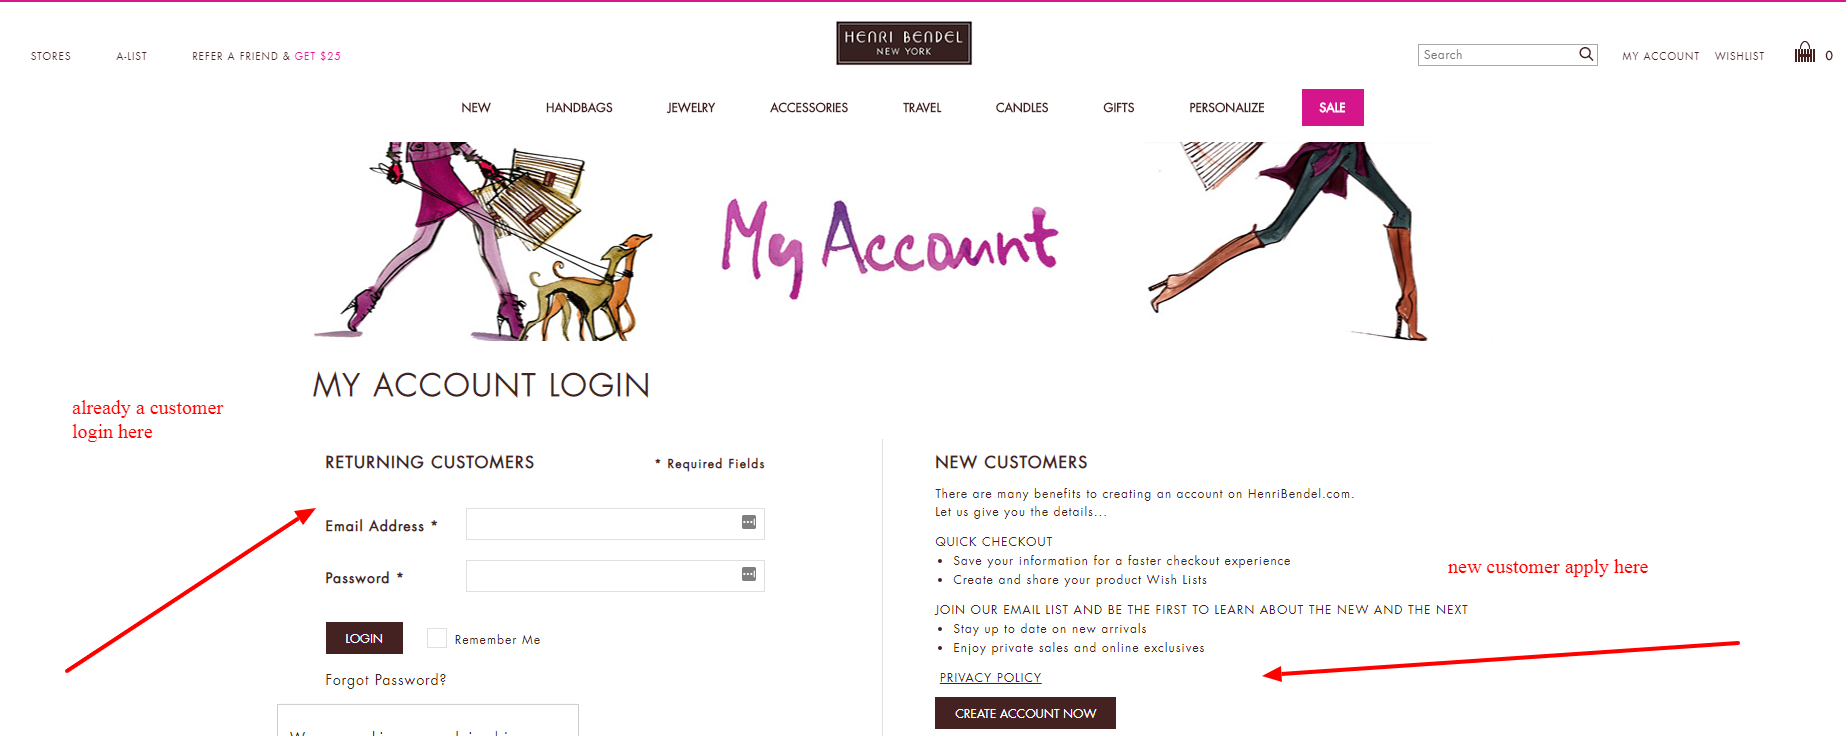 log in to your henri bendel a list credit card account